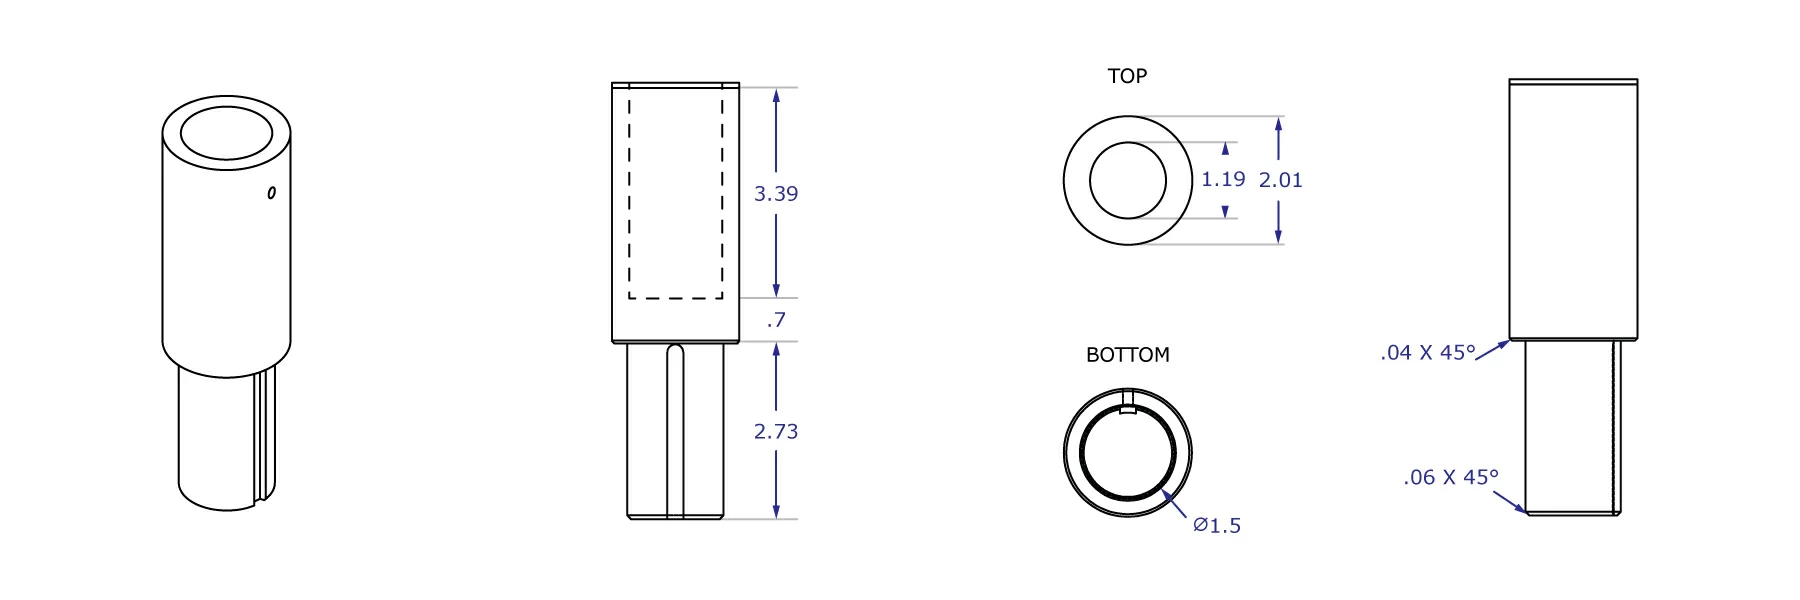 A97 pole top mount specification drawings of sides, top and bottom views with measurements